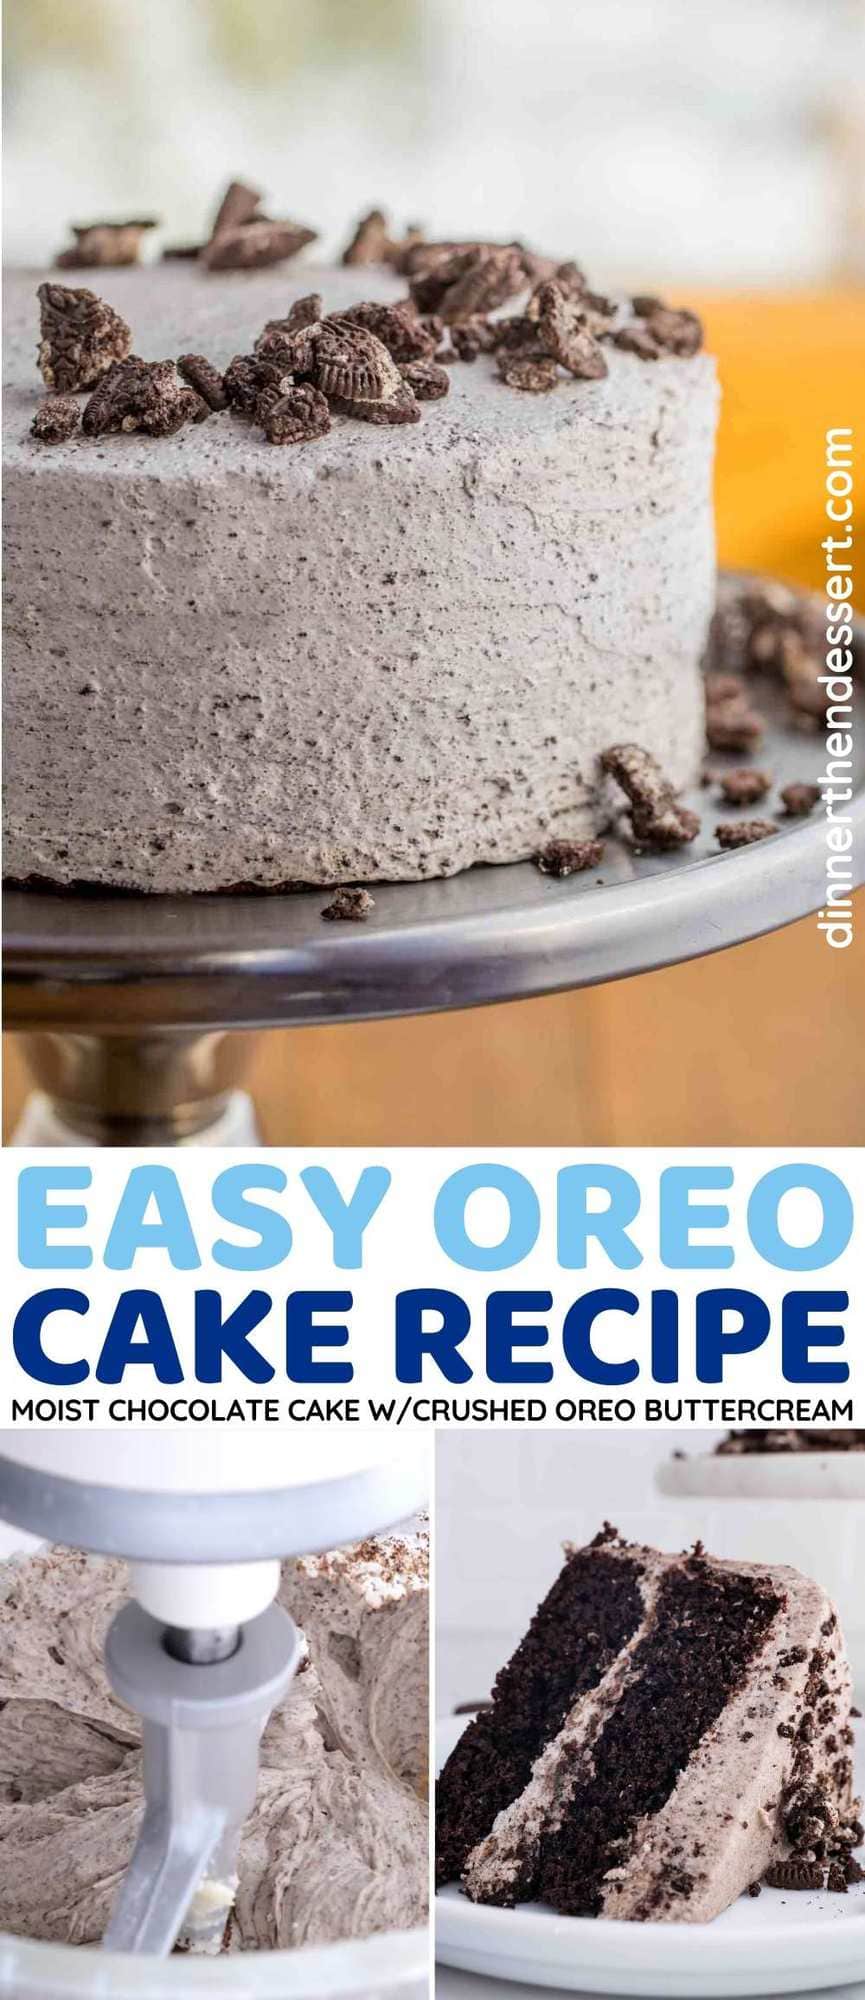 Eggless Oreo Cake with Whipped Cream Frosting Recipe - The Yummy Delights